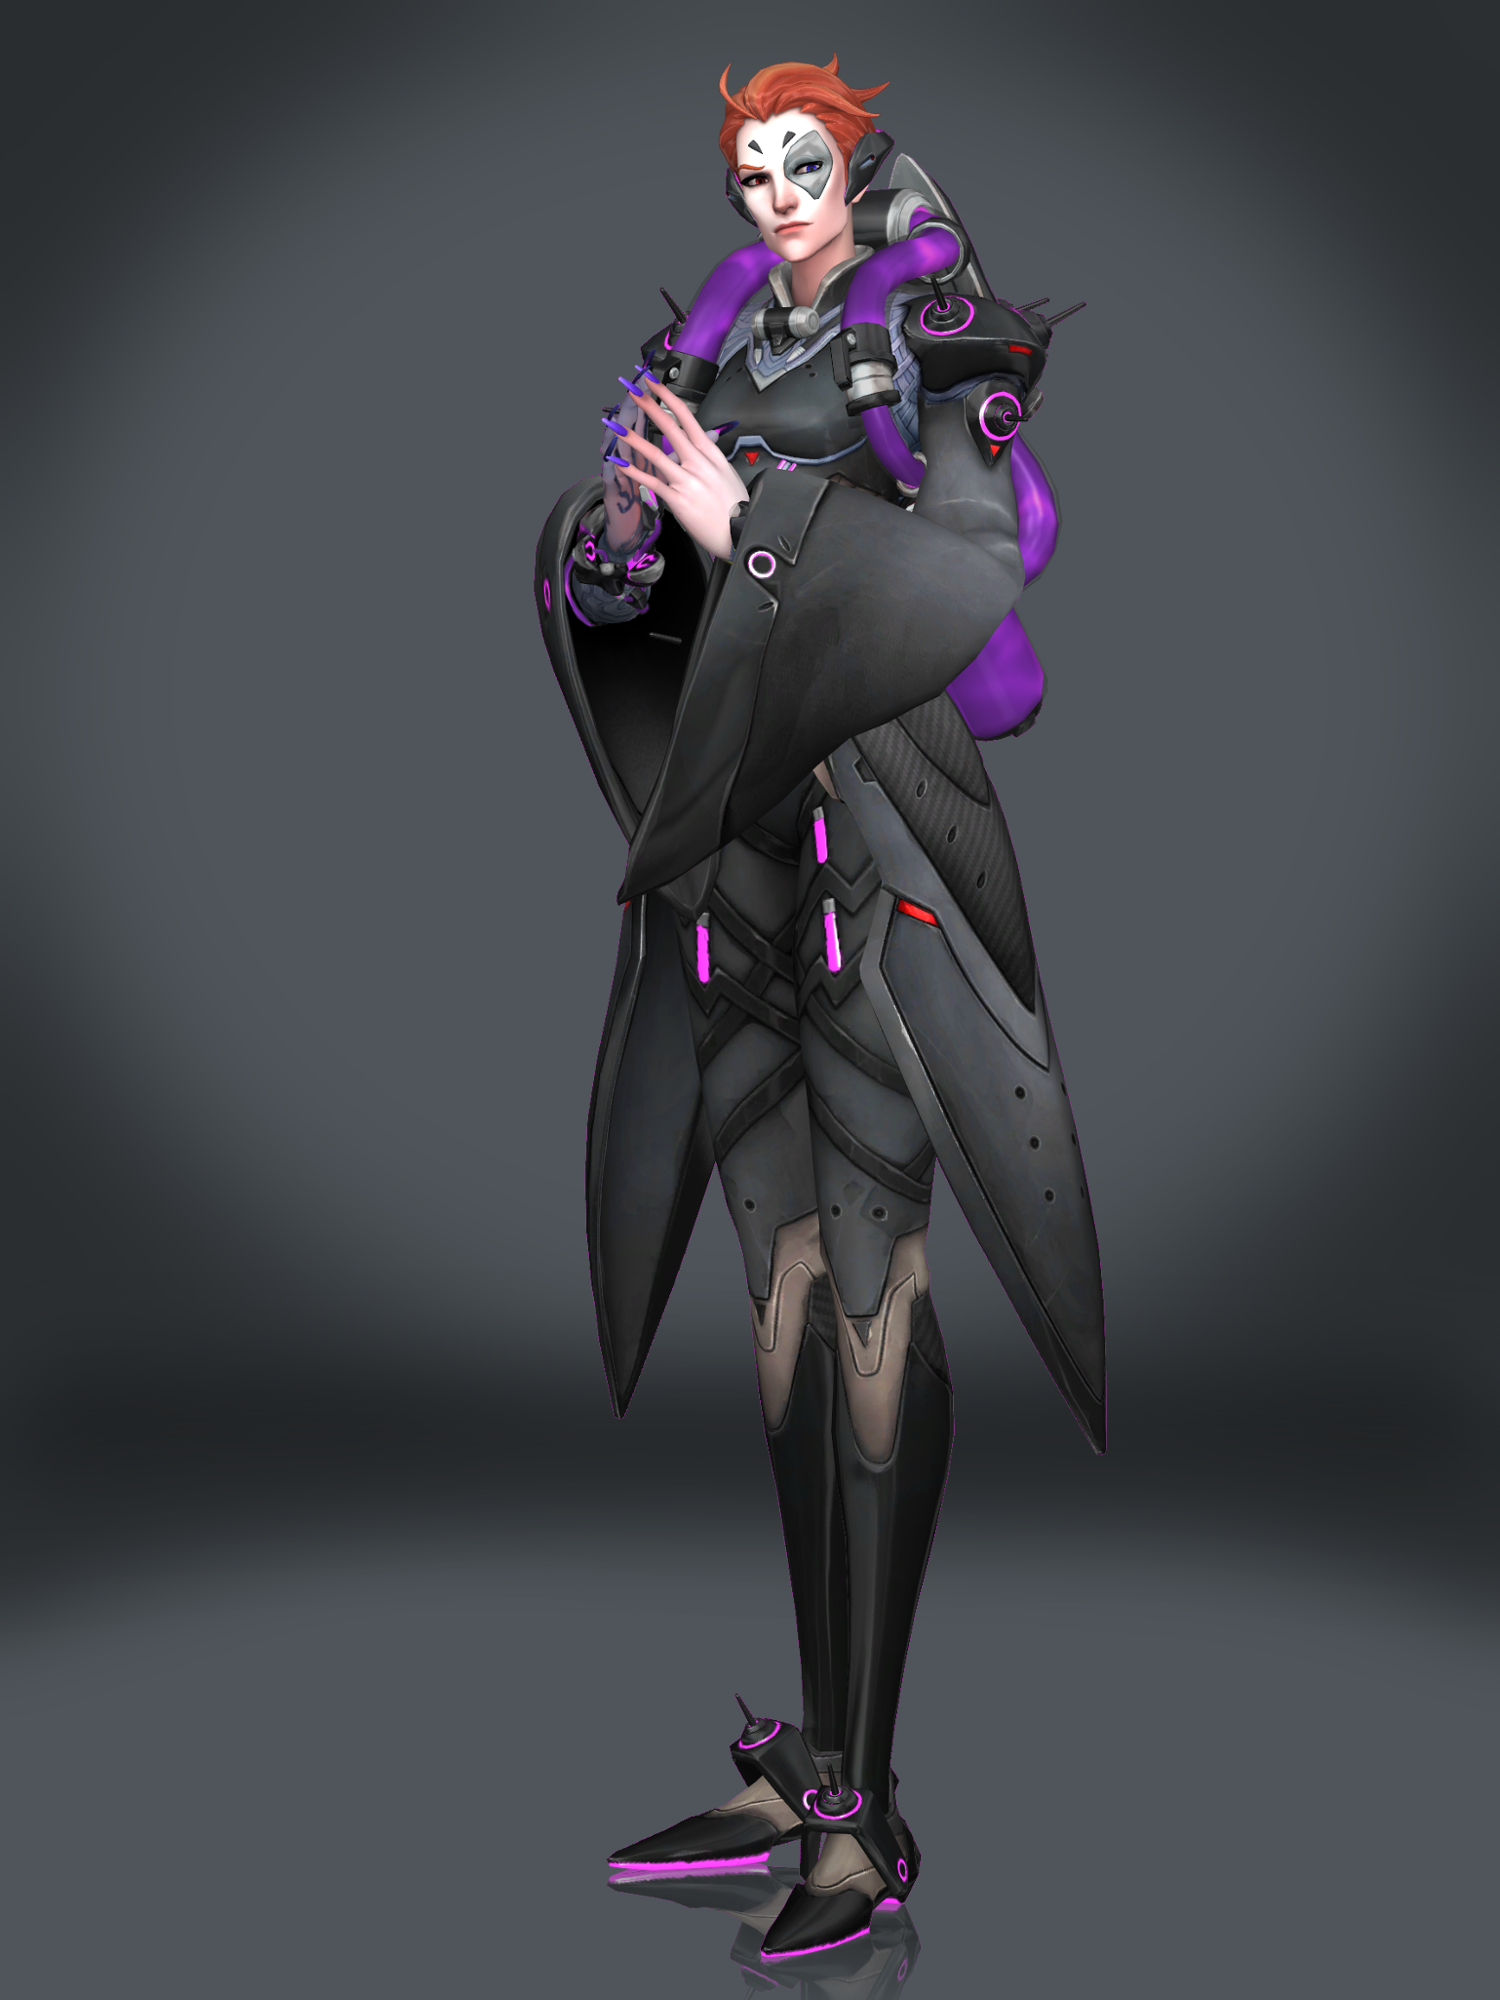 Moira from Overwatch Property of Blizzard Entertainment I do not own anythi...